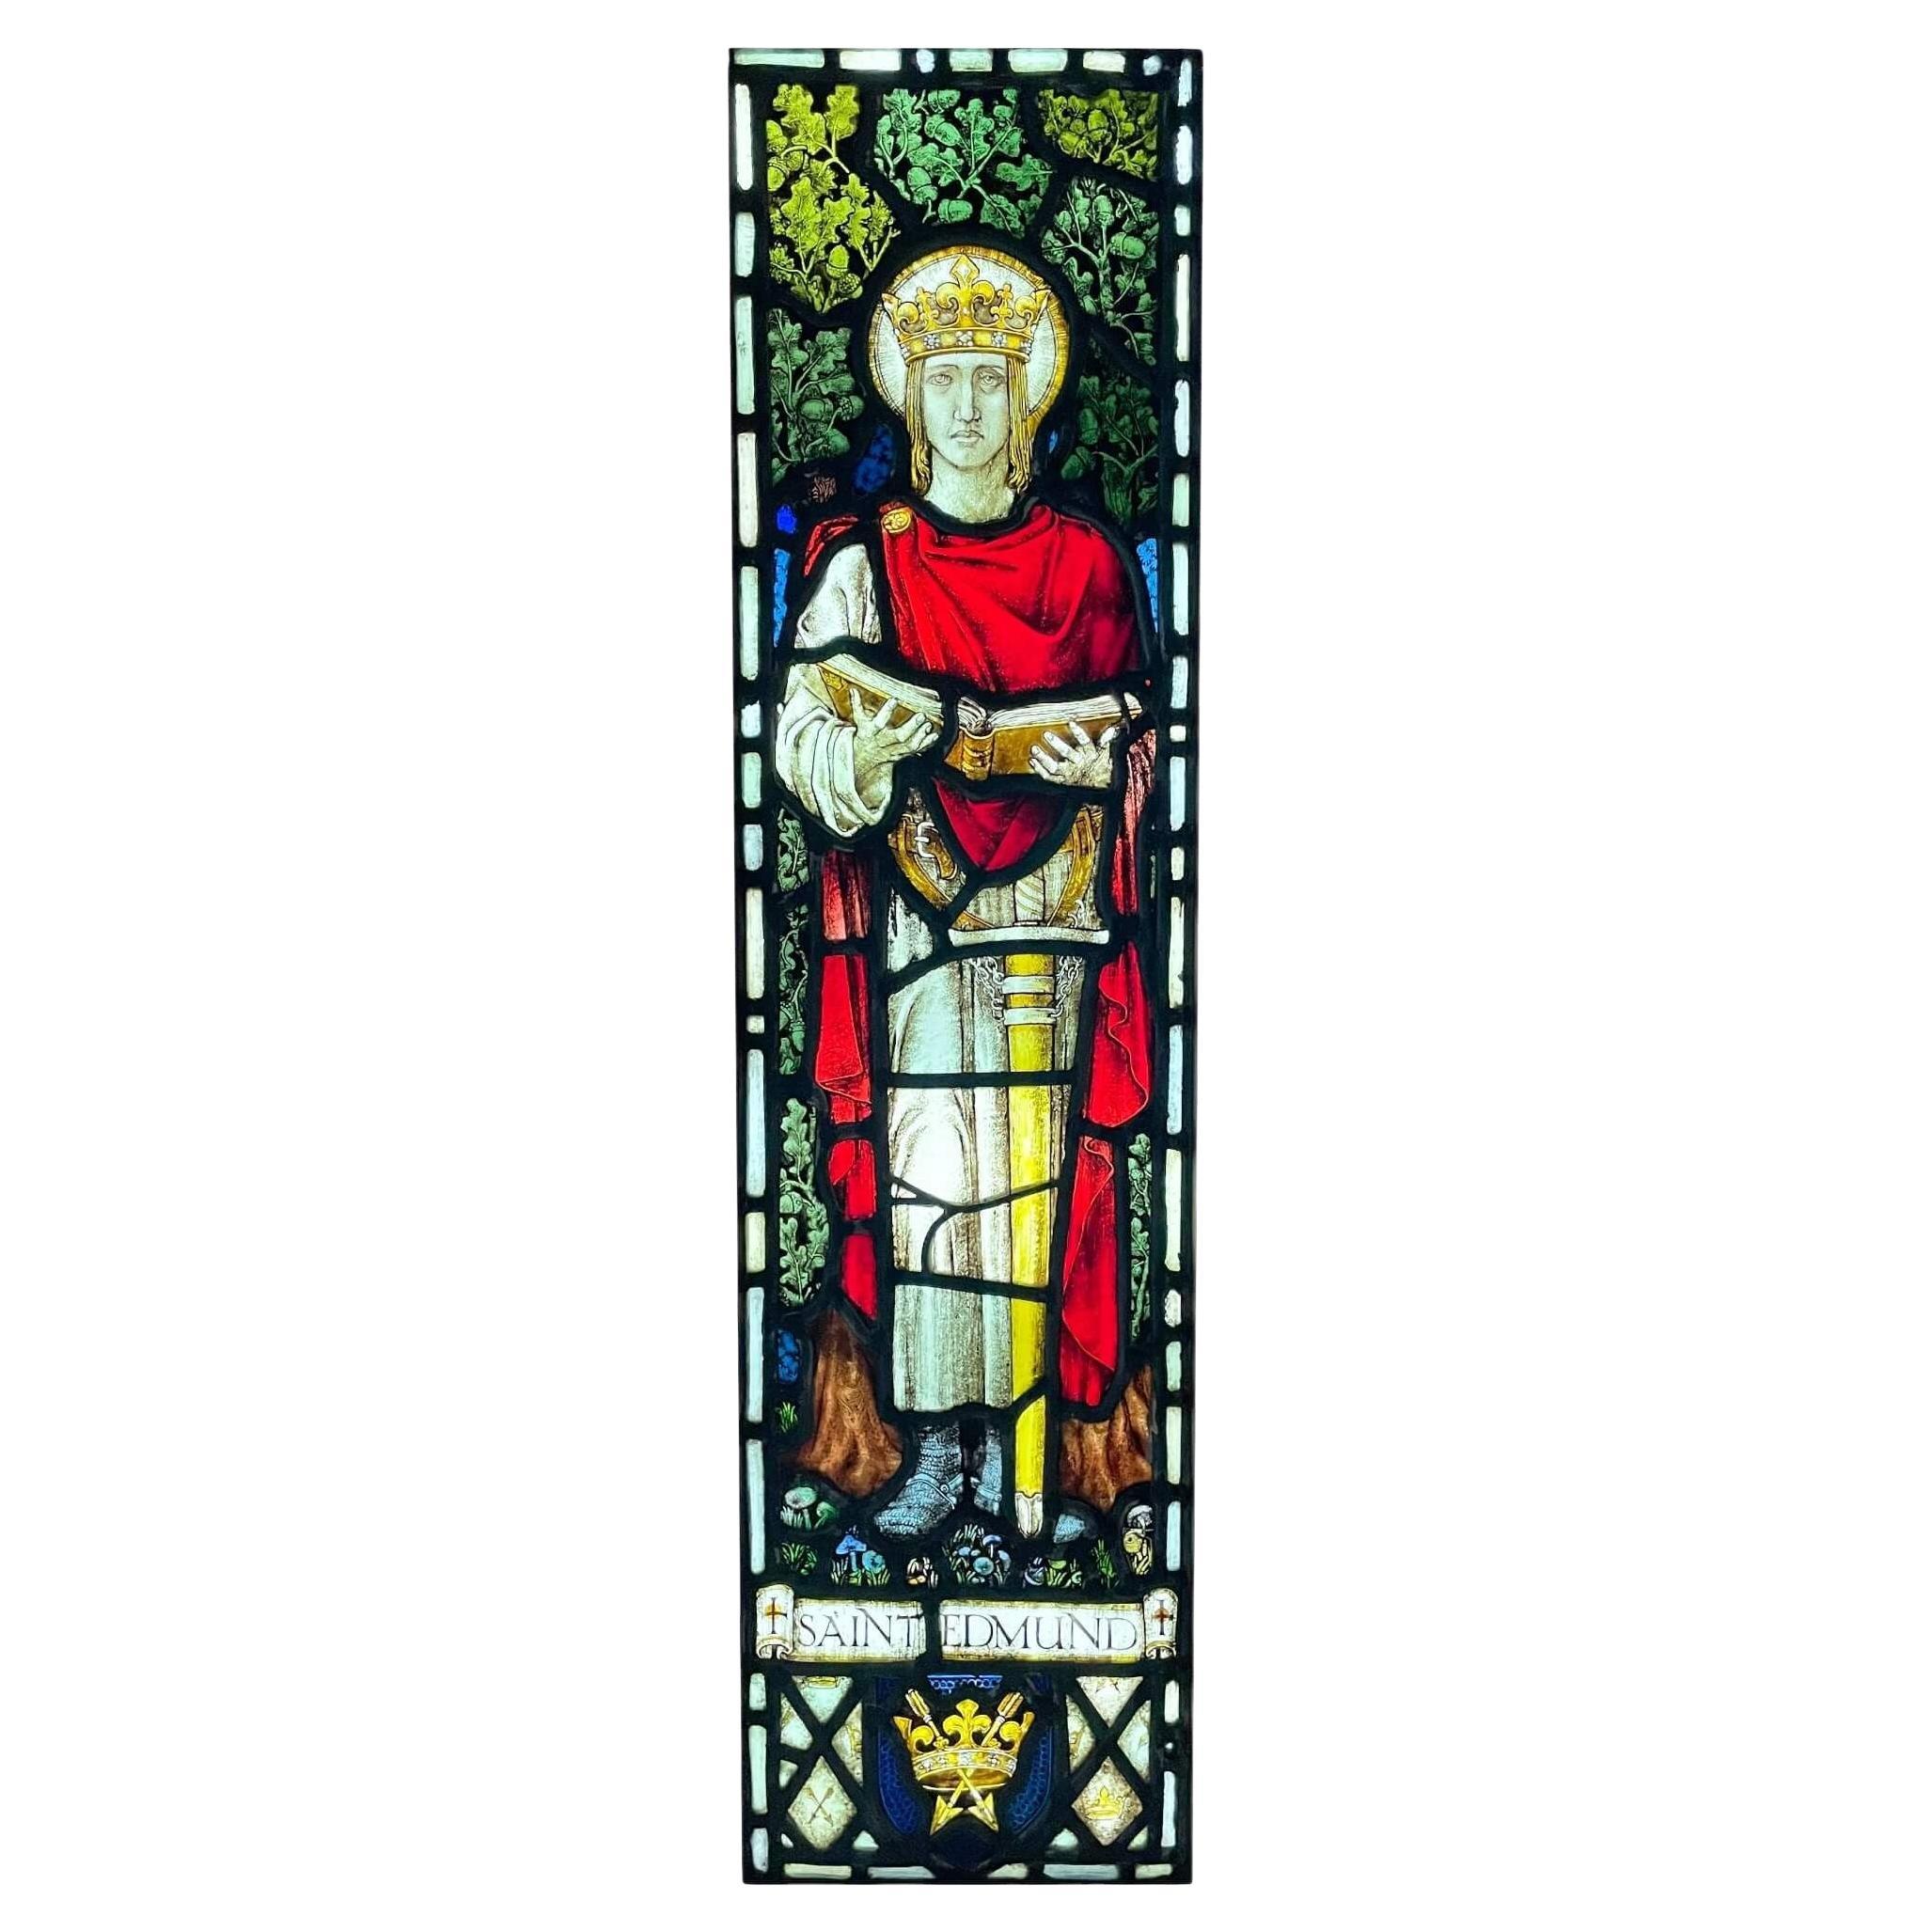 Antique Stained Glass Window of Saint Edmund For Sale